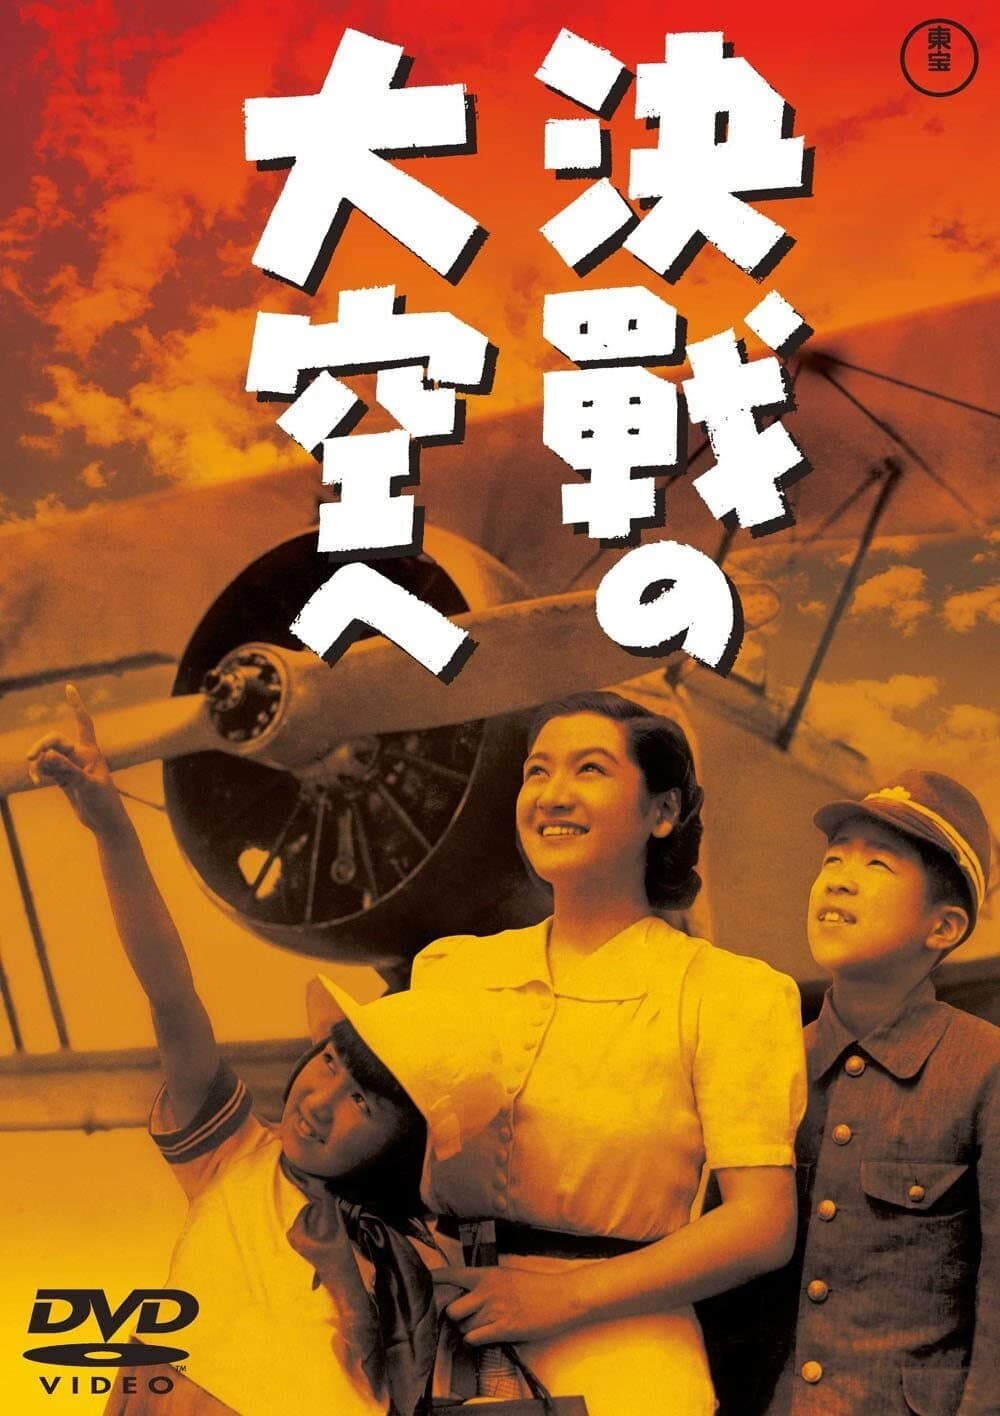 Toward the Decisive Battle in the Sky (1943)